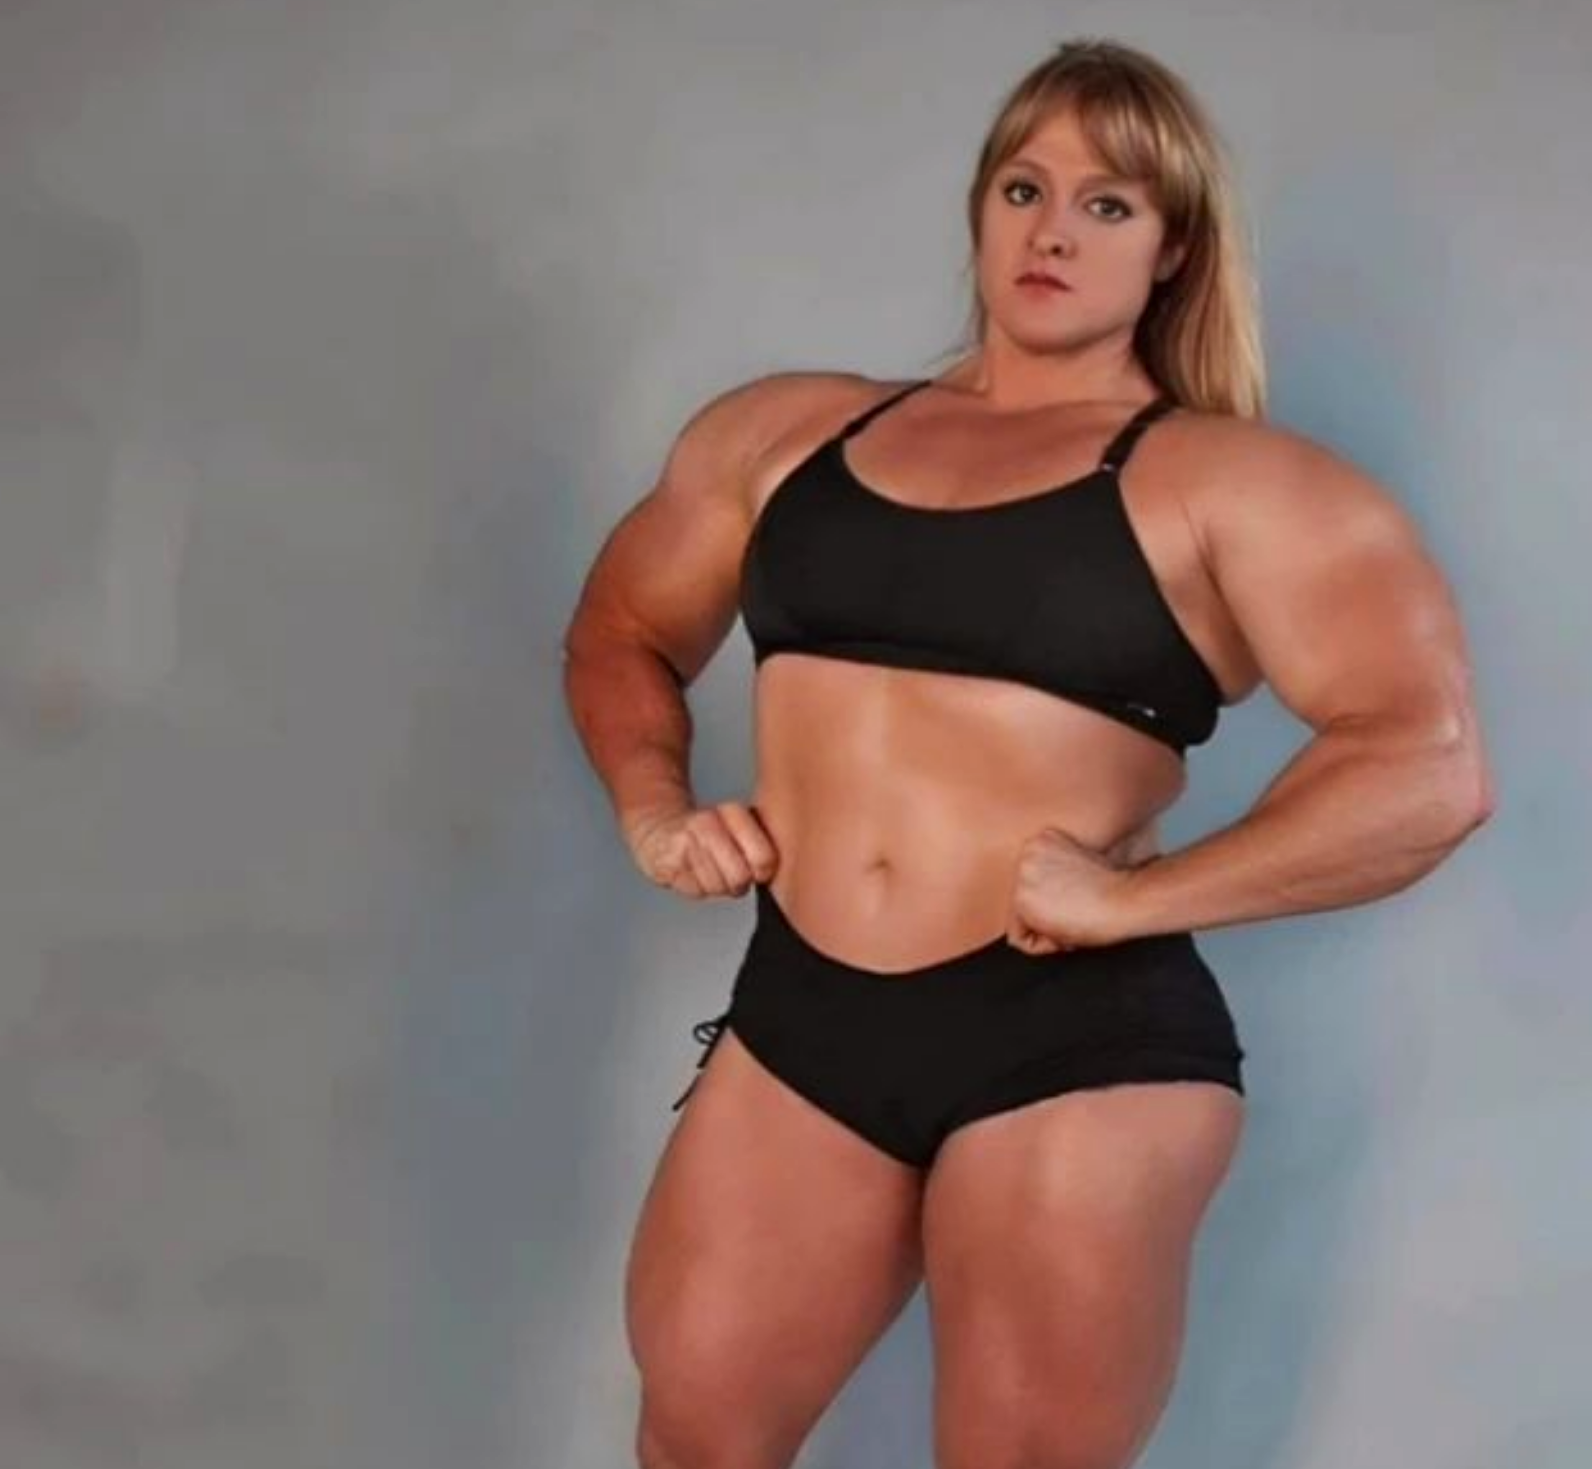 Best Female Physical: 100 Contestants Who Broke Stereotypes